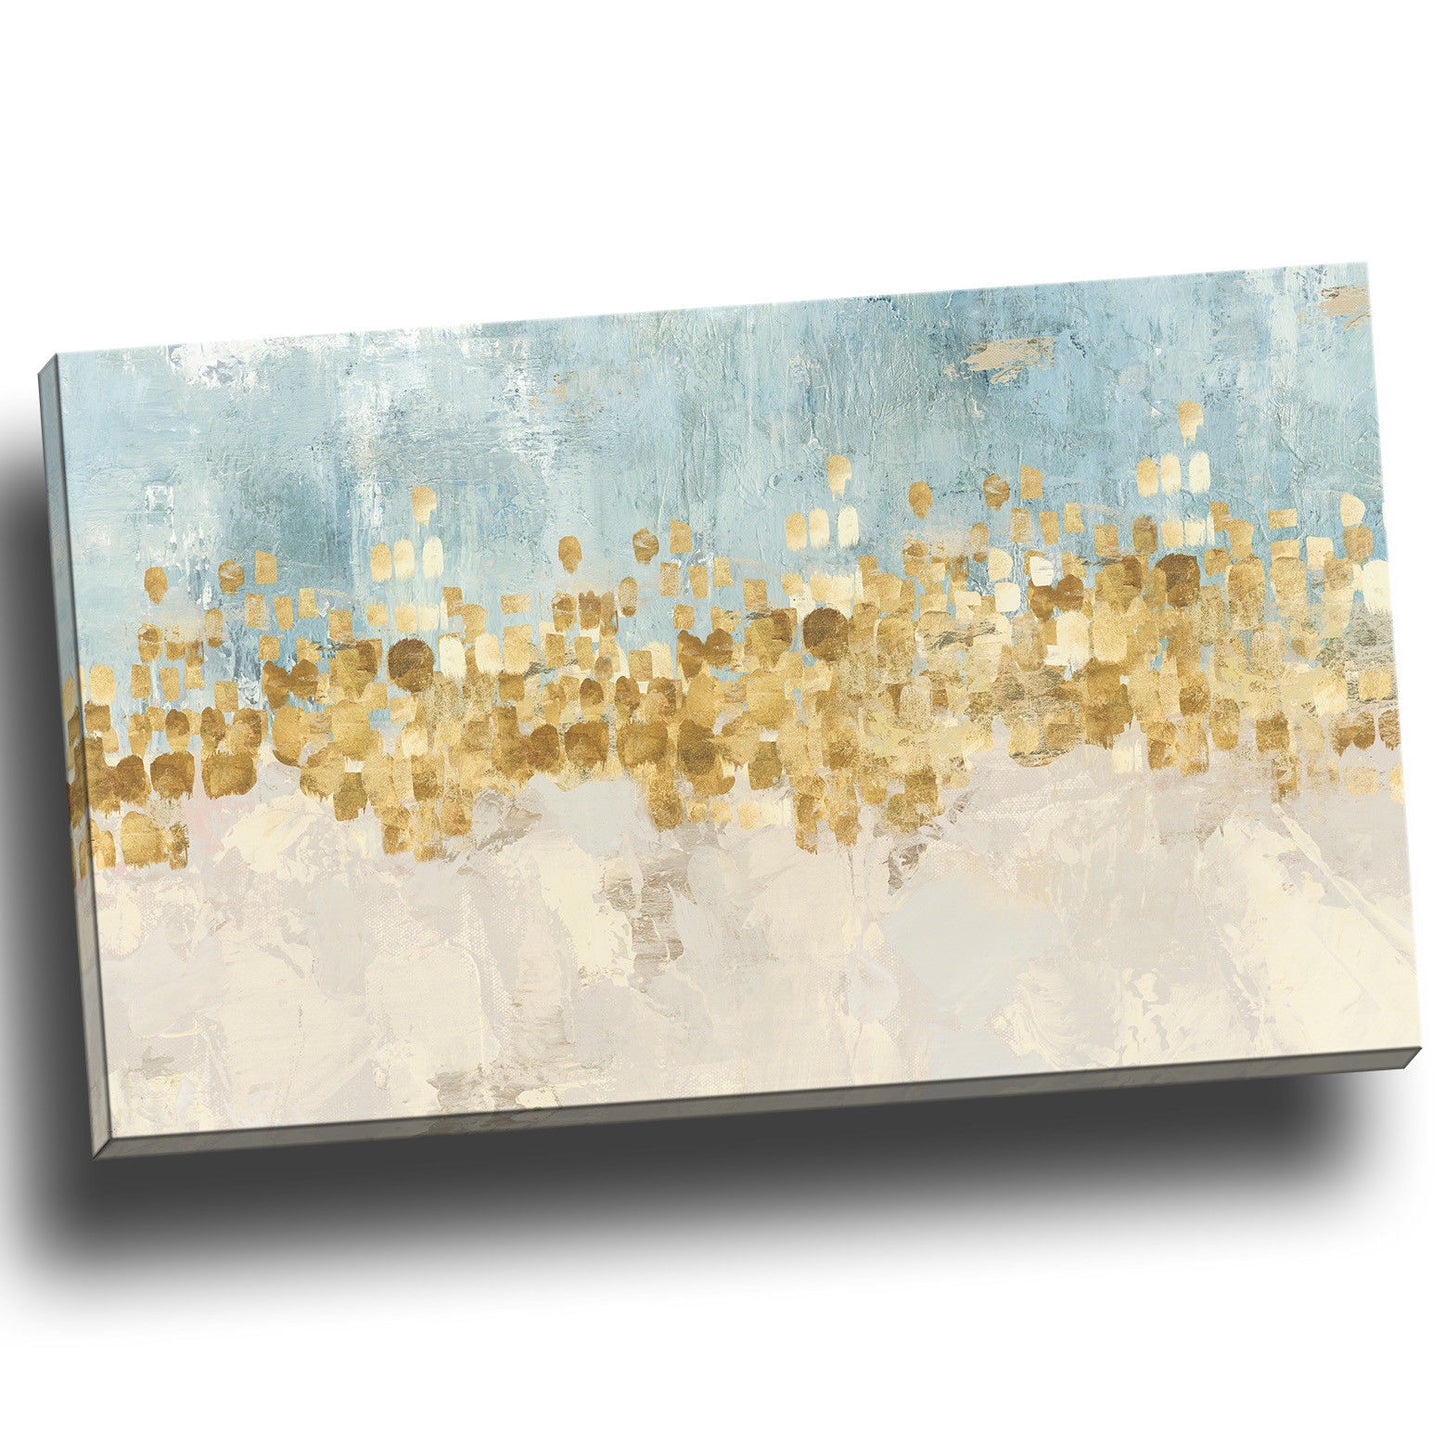 Dancing star blue auqa gold star Stretched Printed canvas abstract print wallart